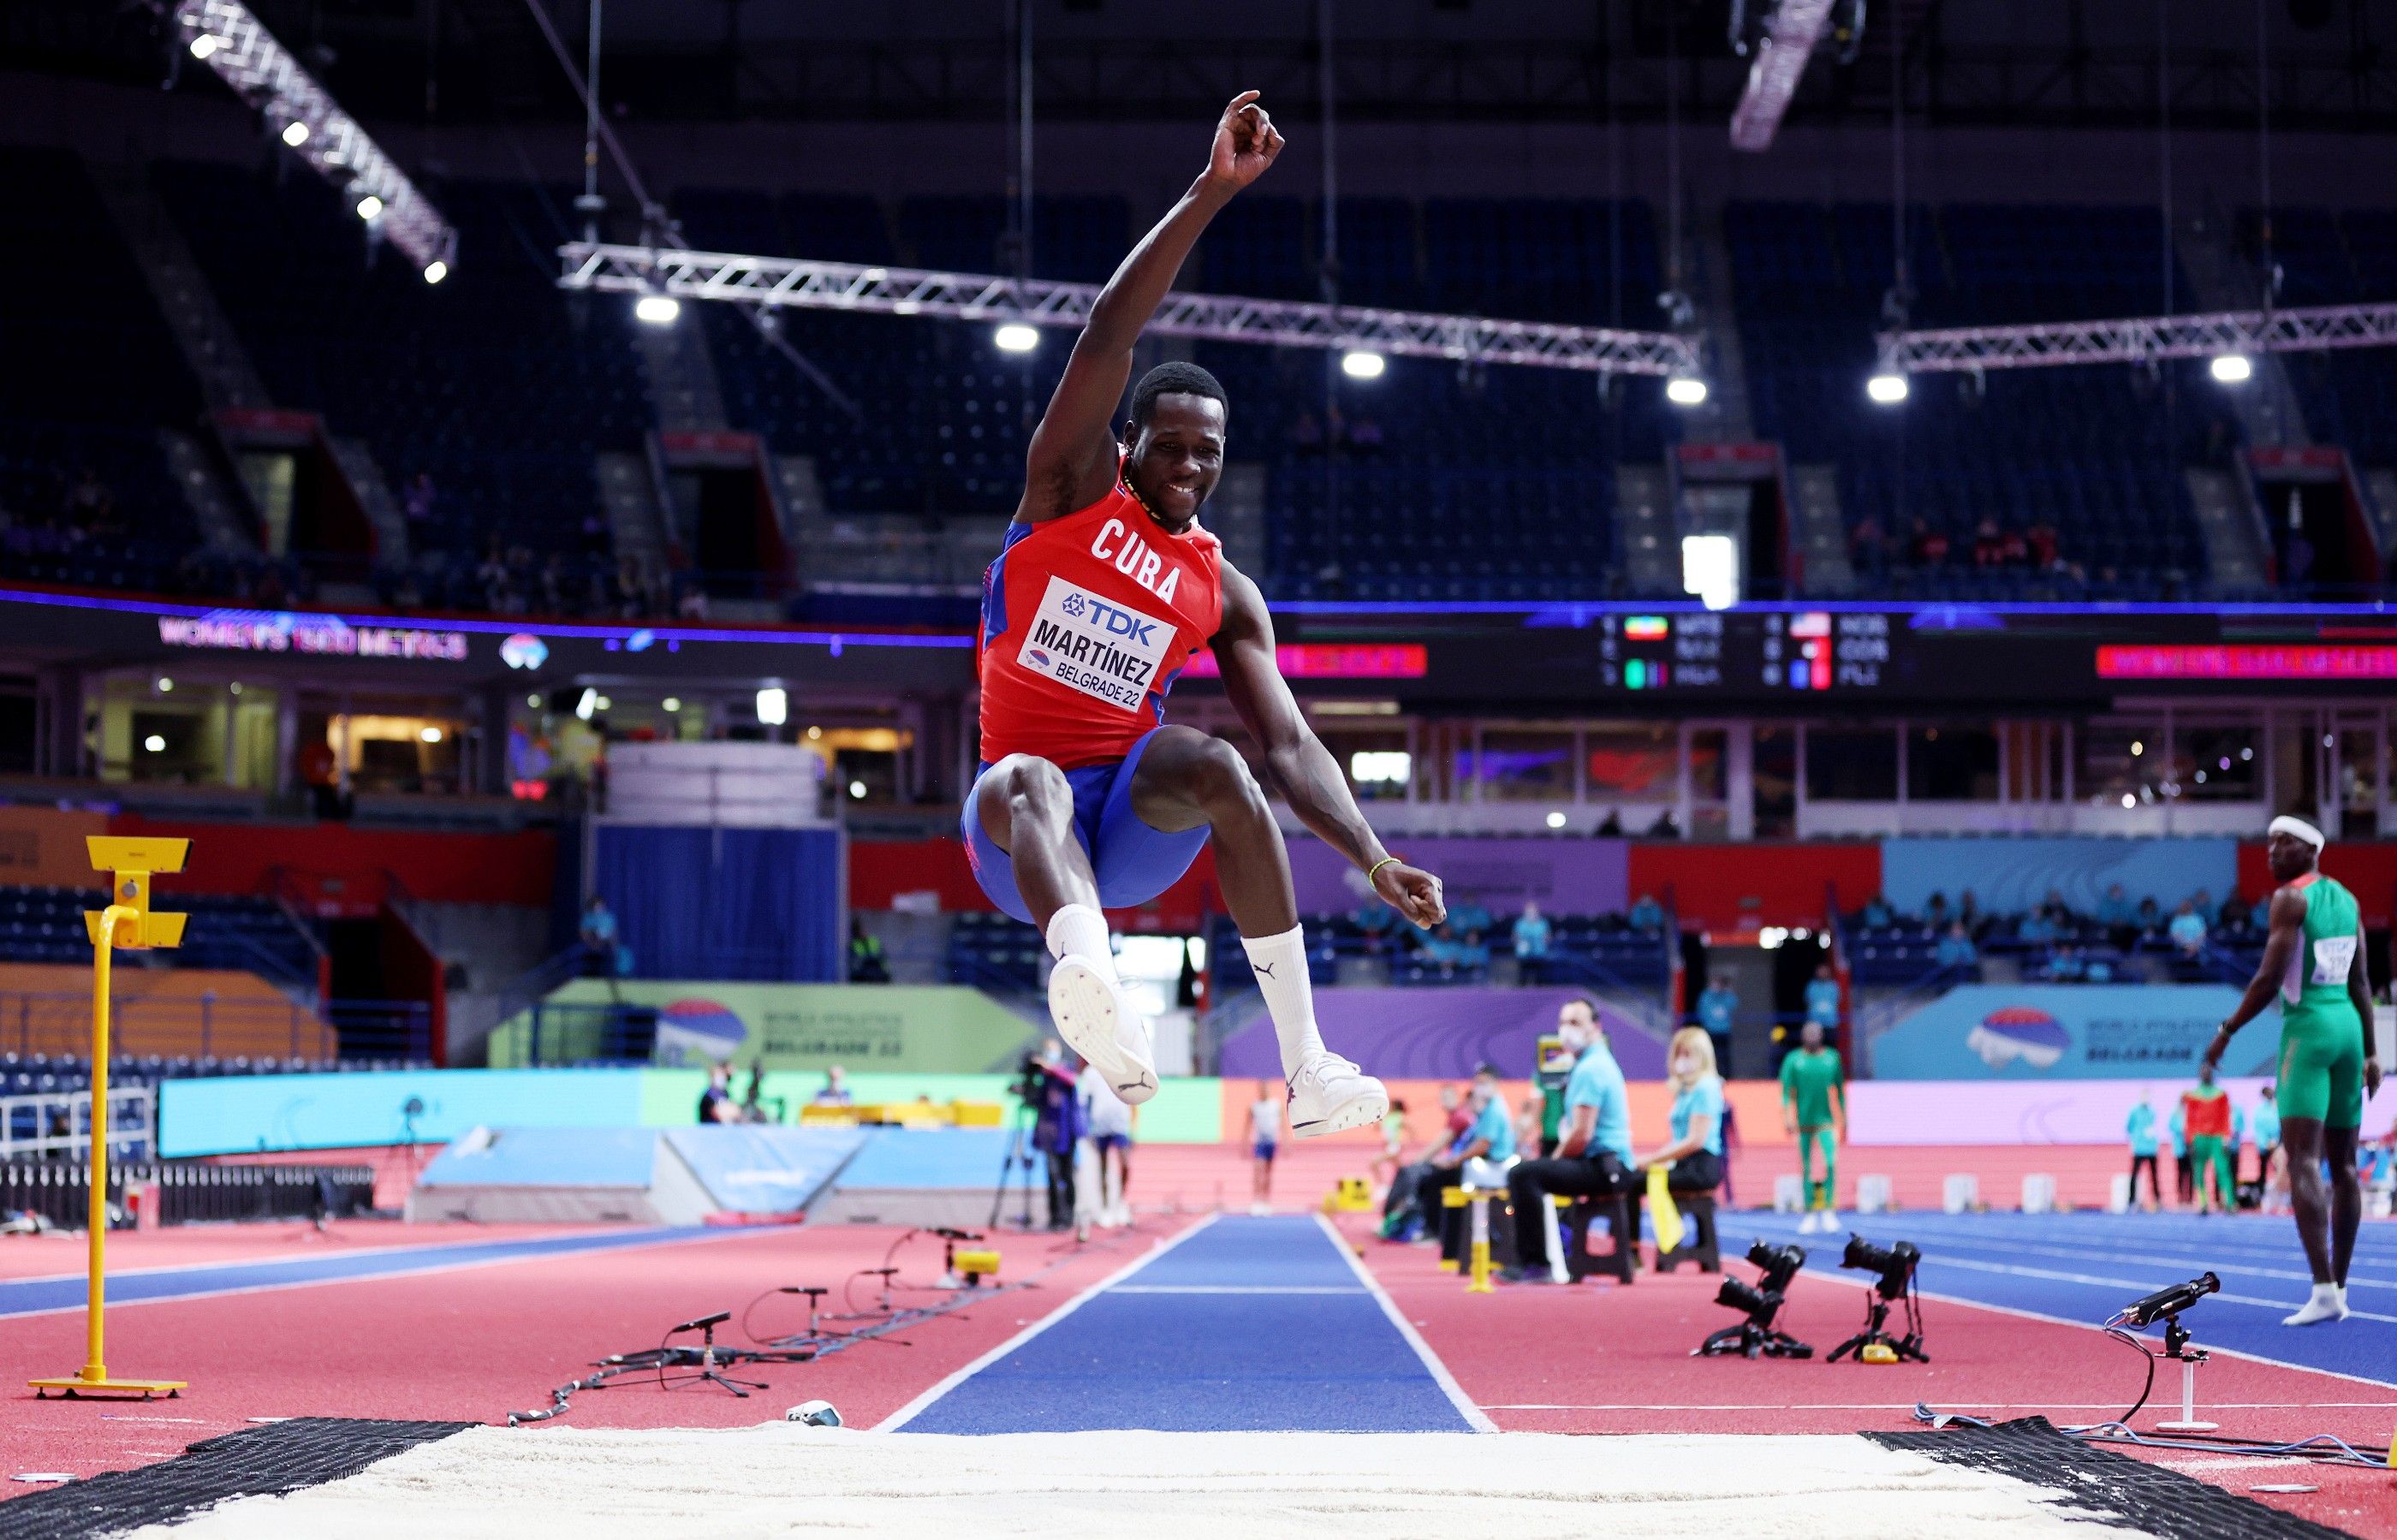 Cuba's Lazaro Martinez competes in the triple jump final at the World Athletics Indoor Championships Belgrade 22